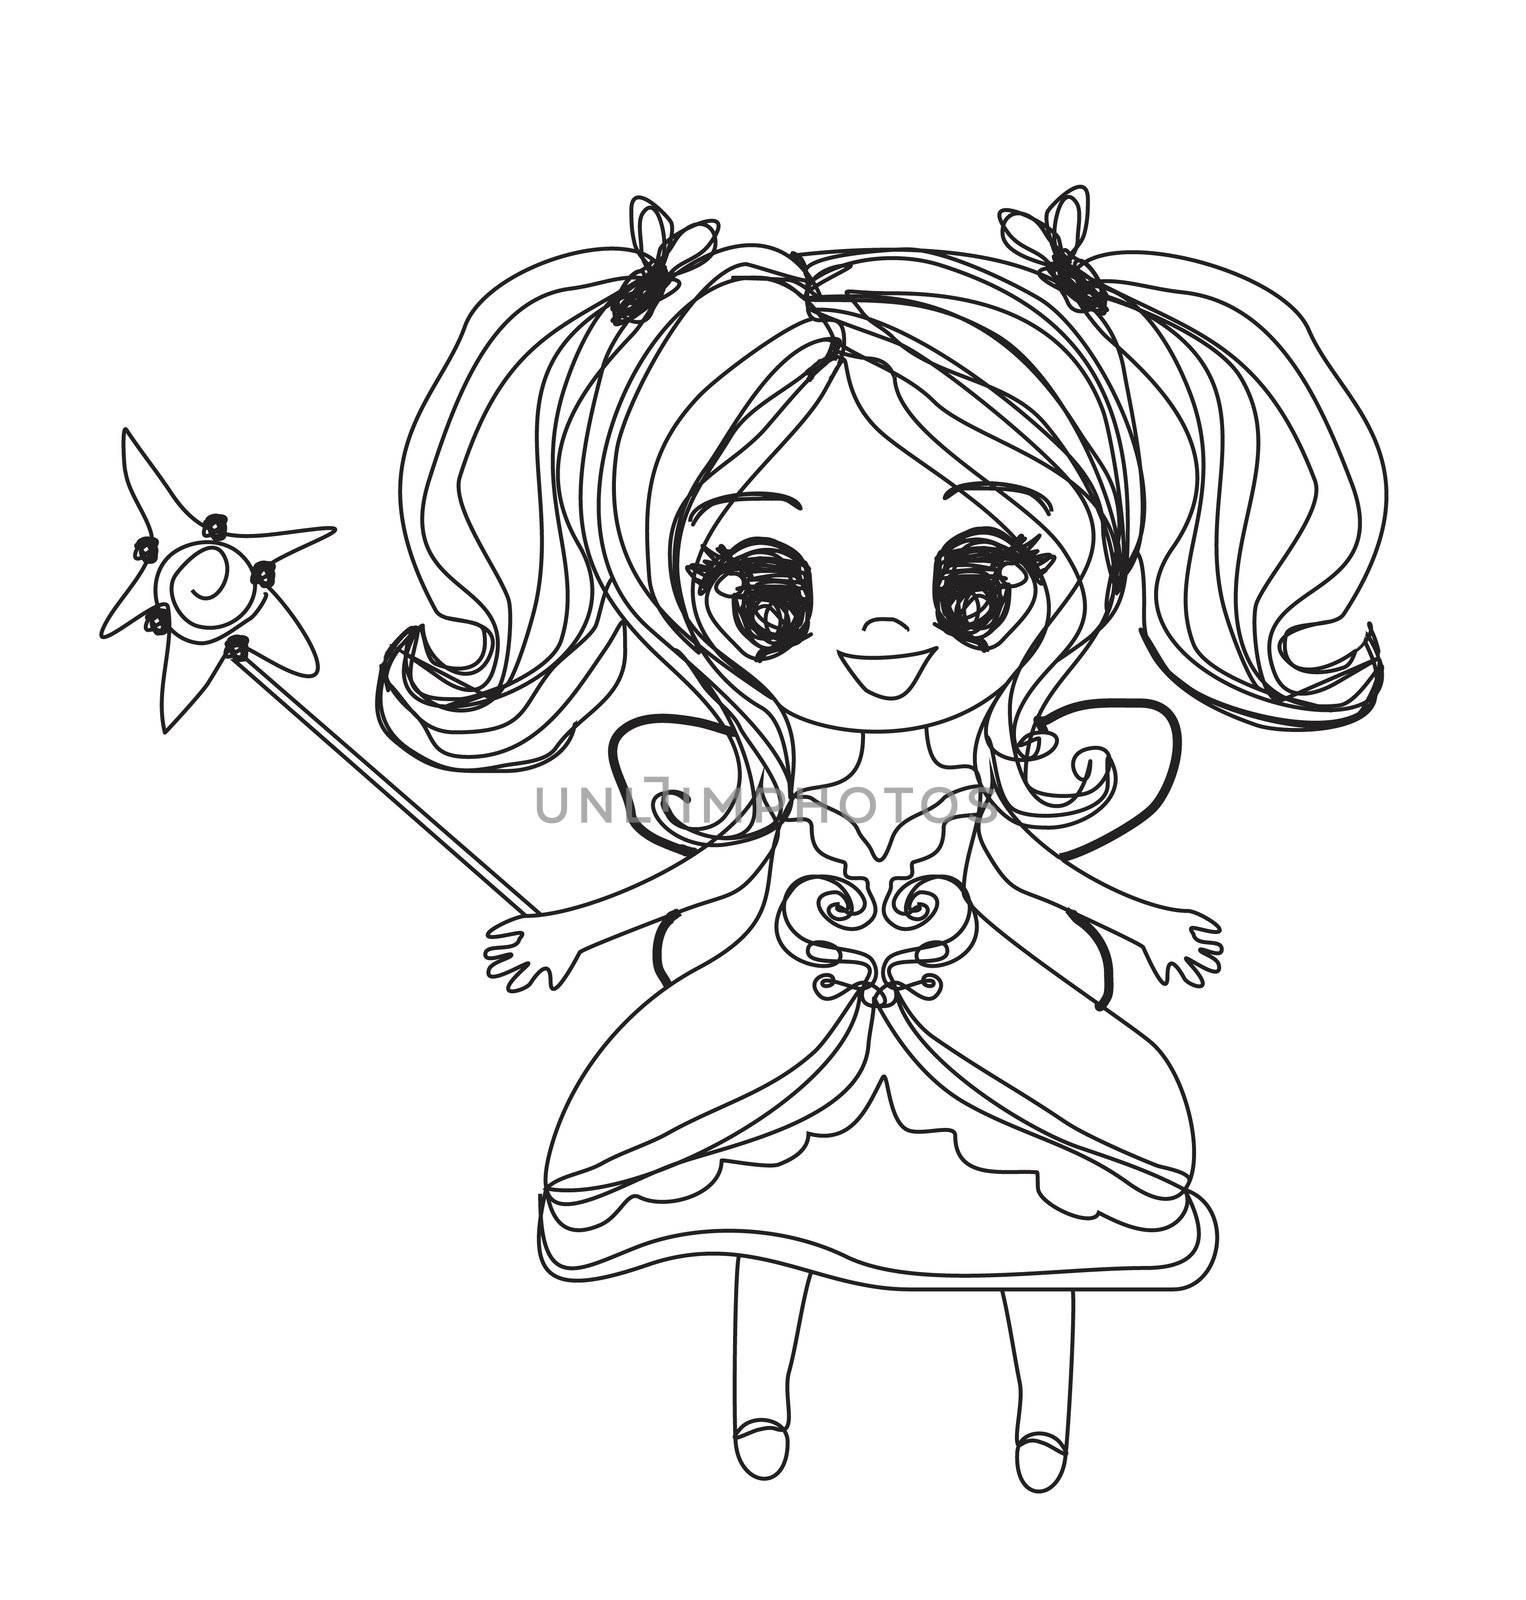 beautiful fairy - doodle vector graphic by JackyBrown